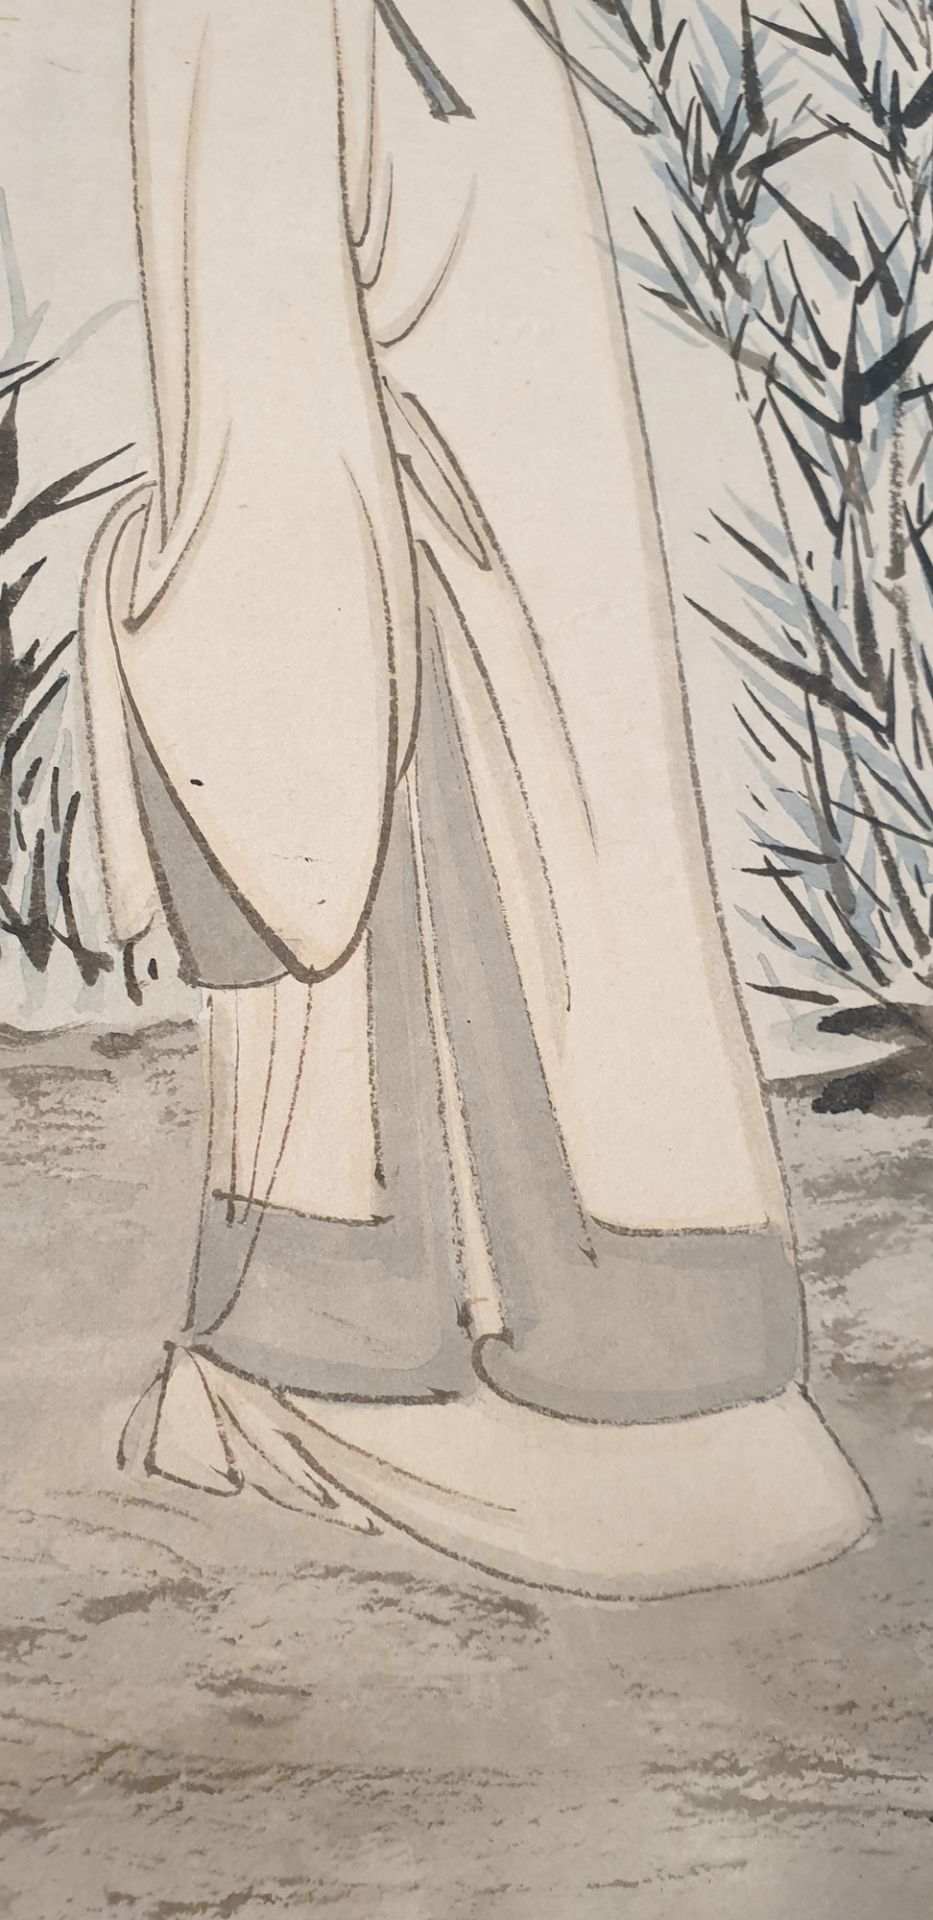 Zhang Daqian (1899-1983), ink and color on paper: 'Amidst the bamboo', dated 1949 - Image 36 of 37